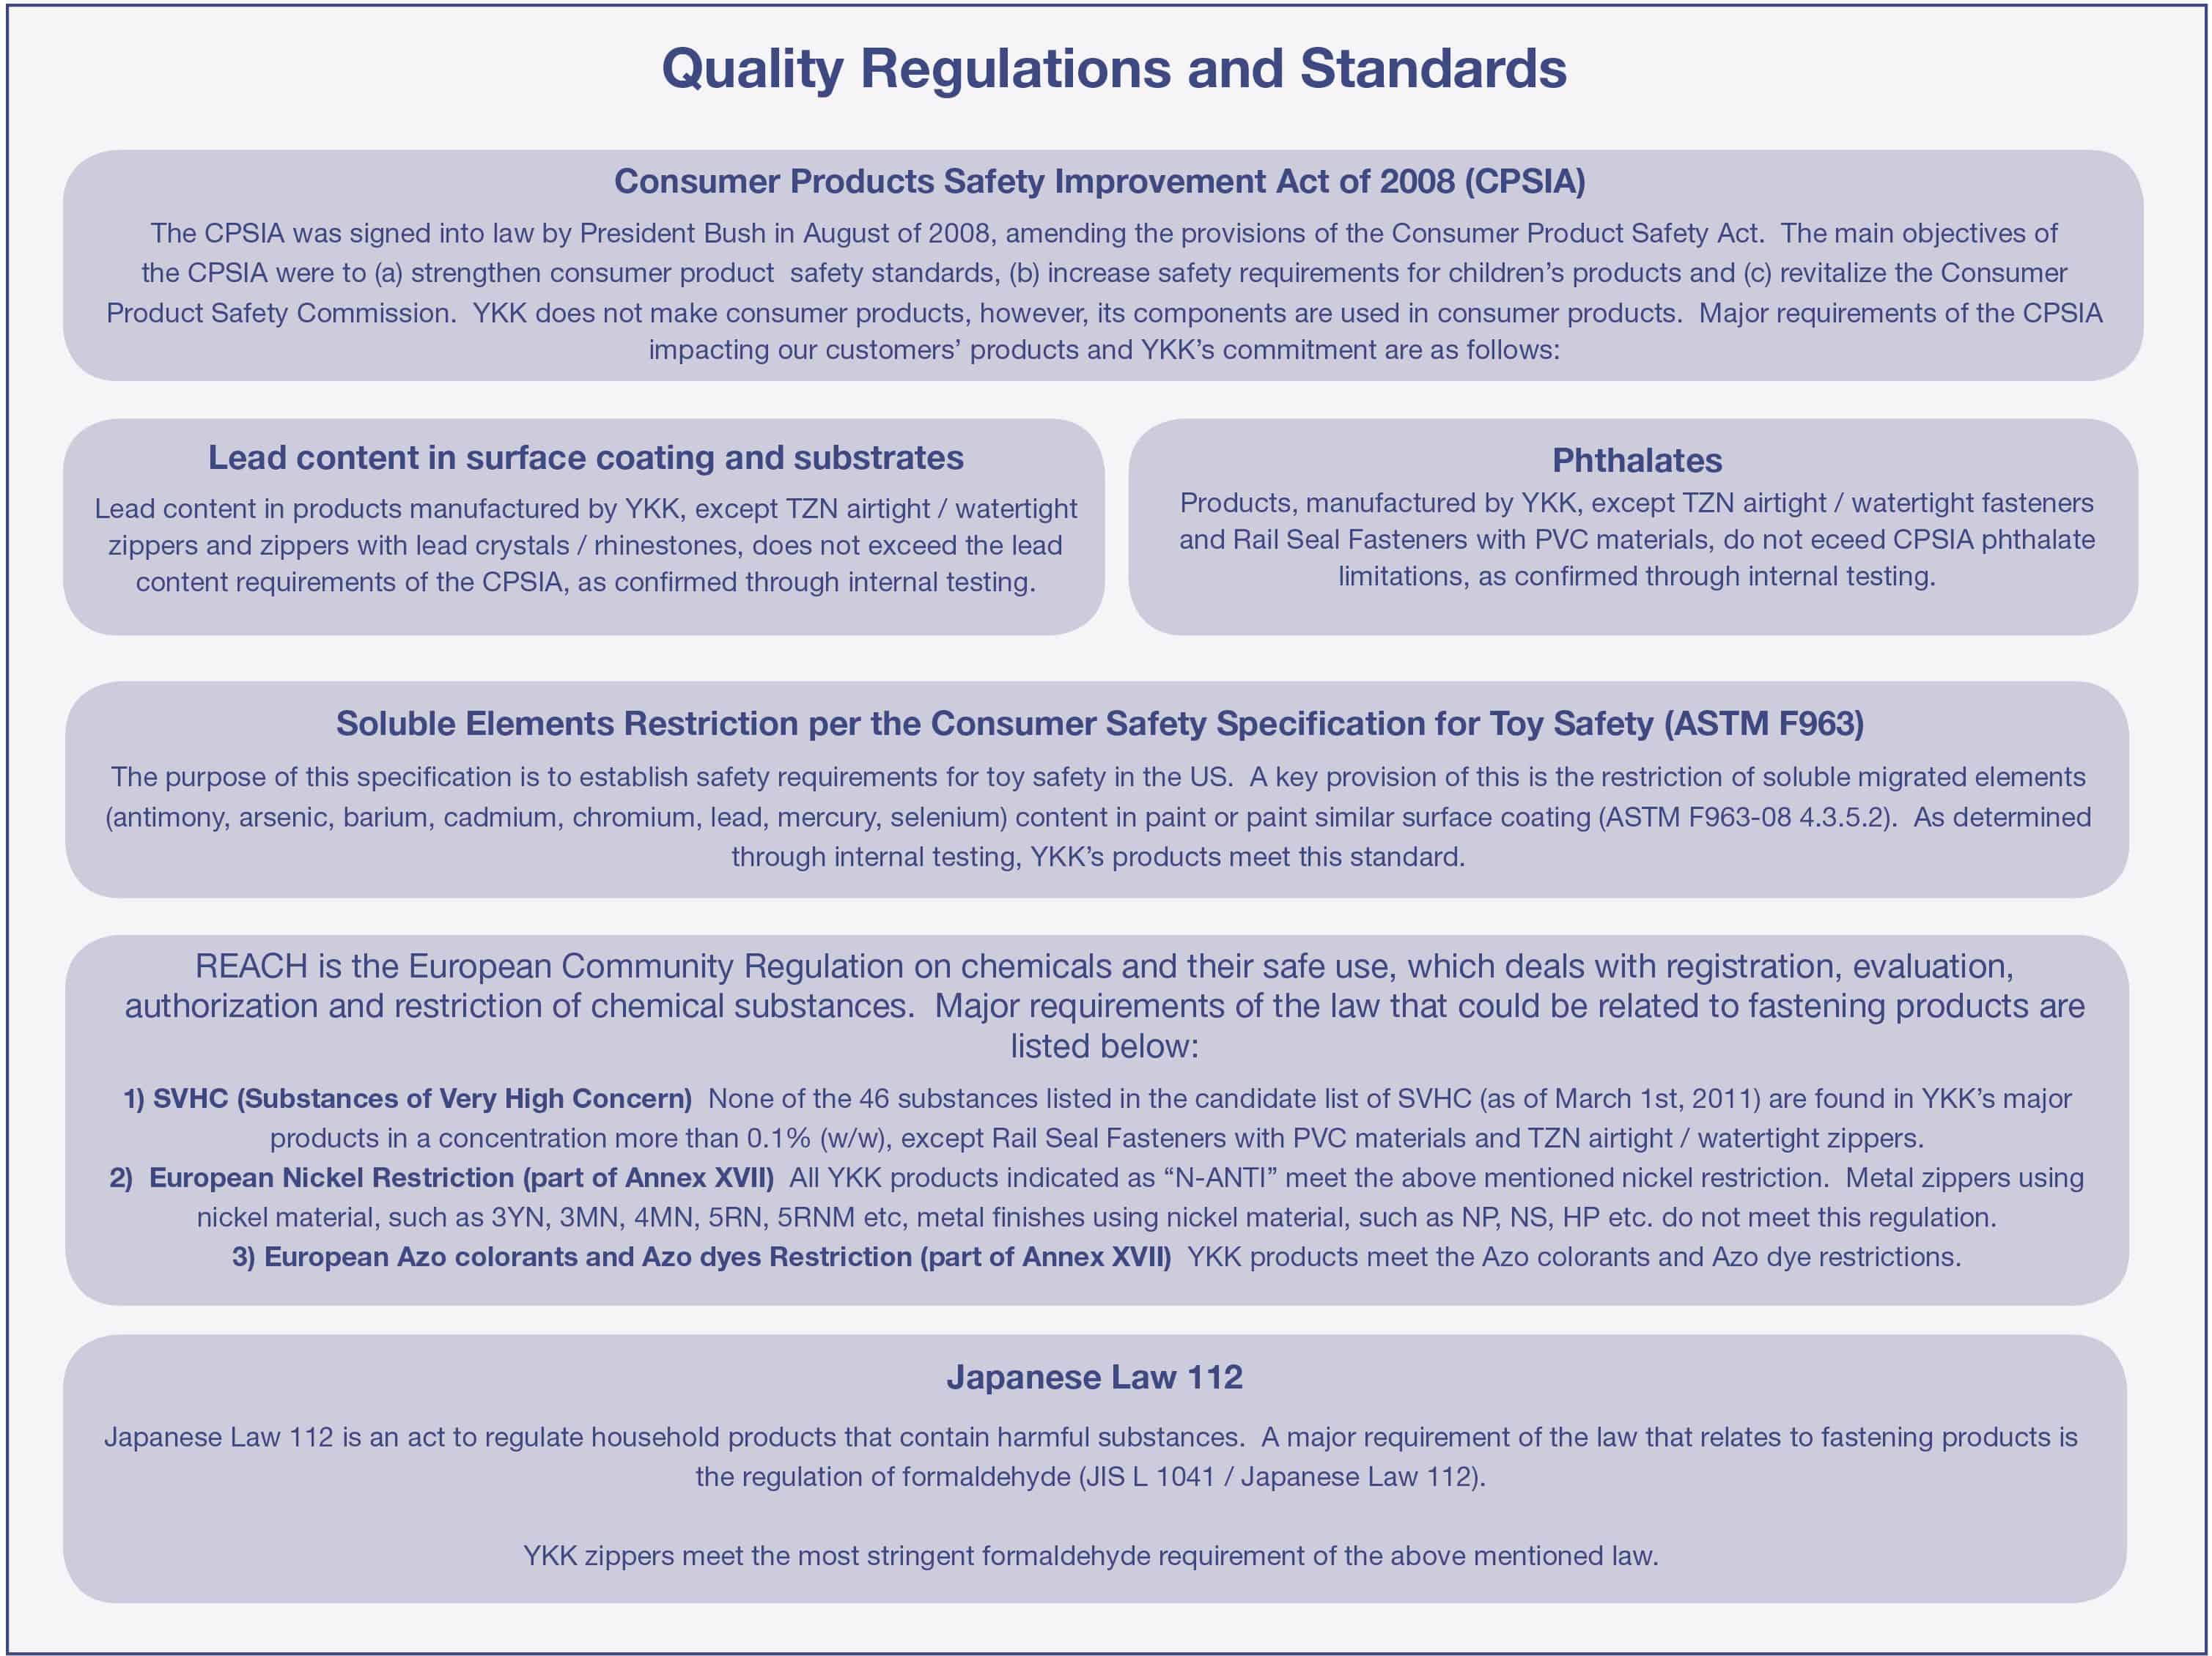 Quality regulations and standards